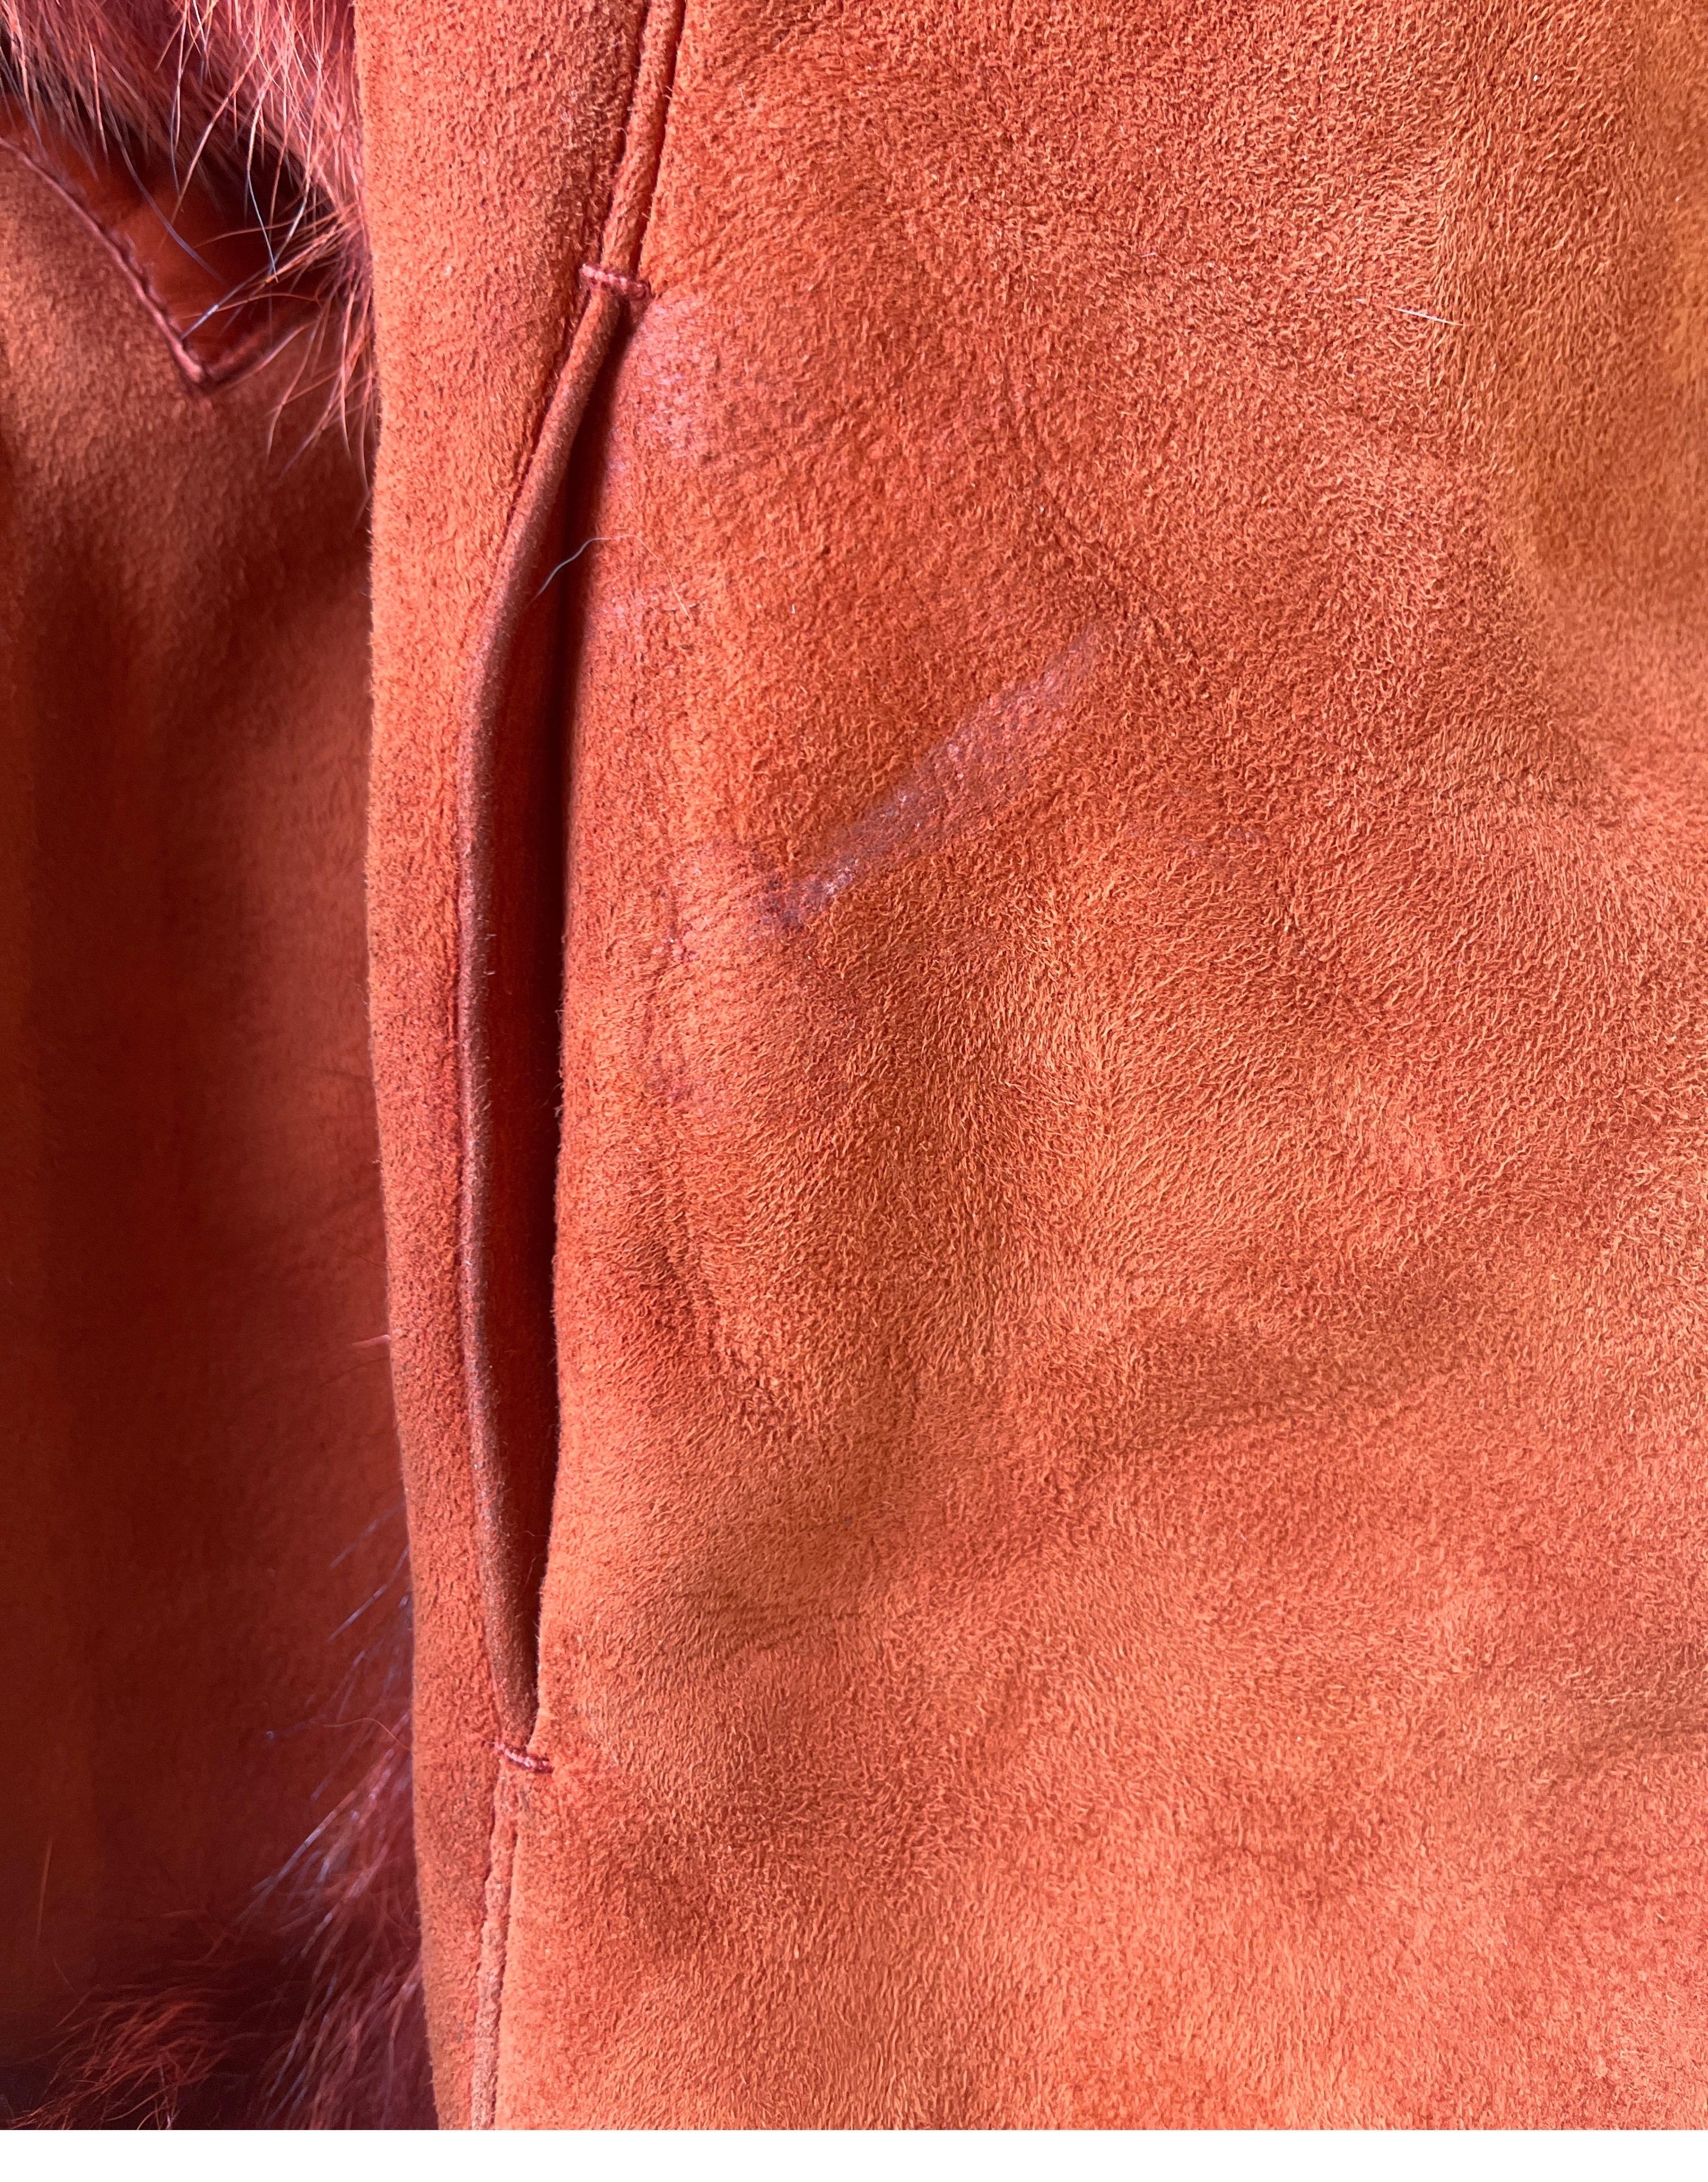 1980s Christian Dior Fourrers Red Suede Leather Fur Shearling Coat For Sale 3